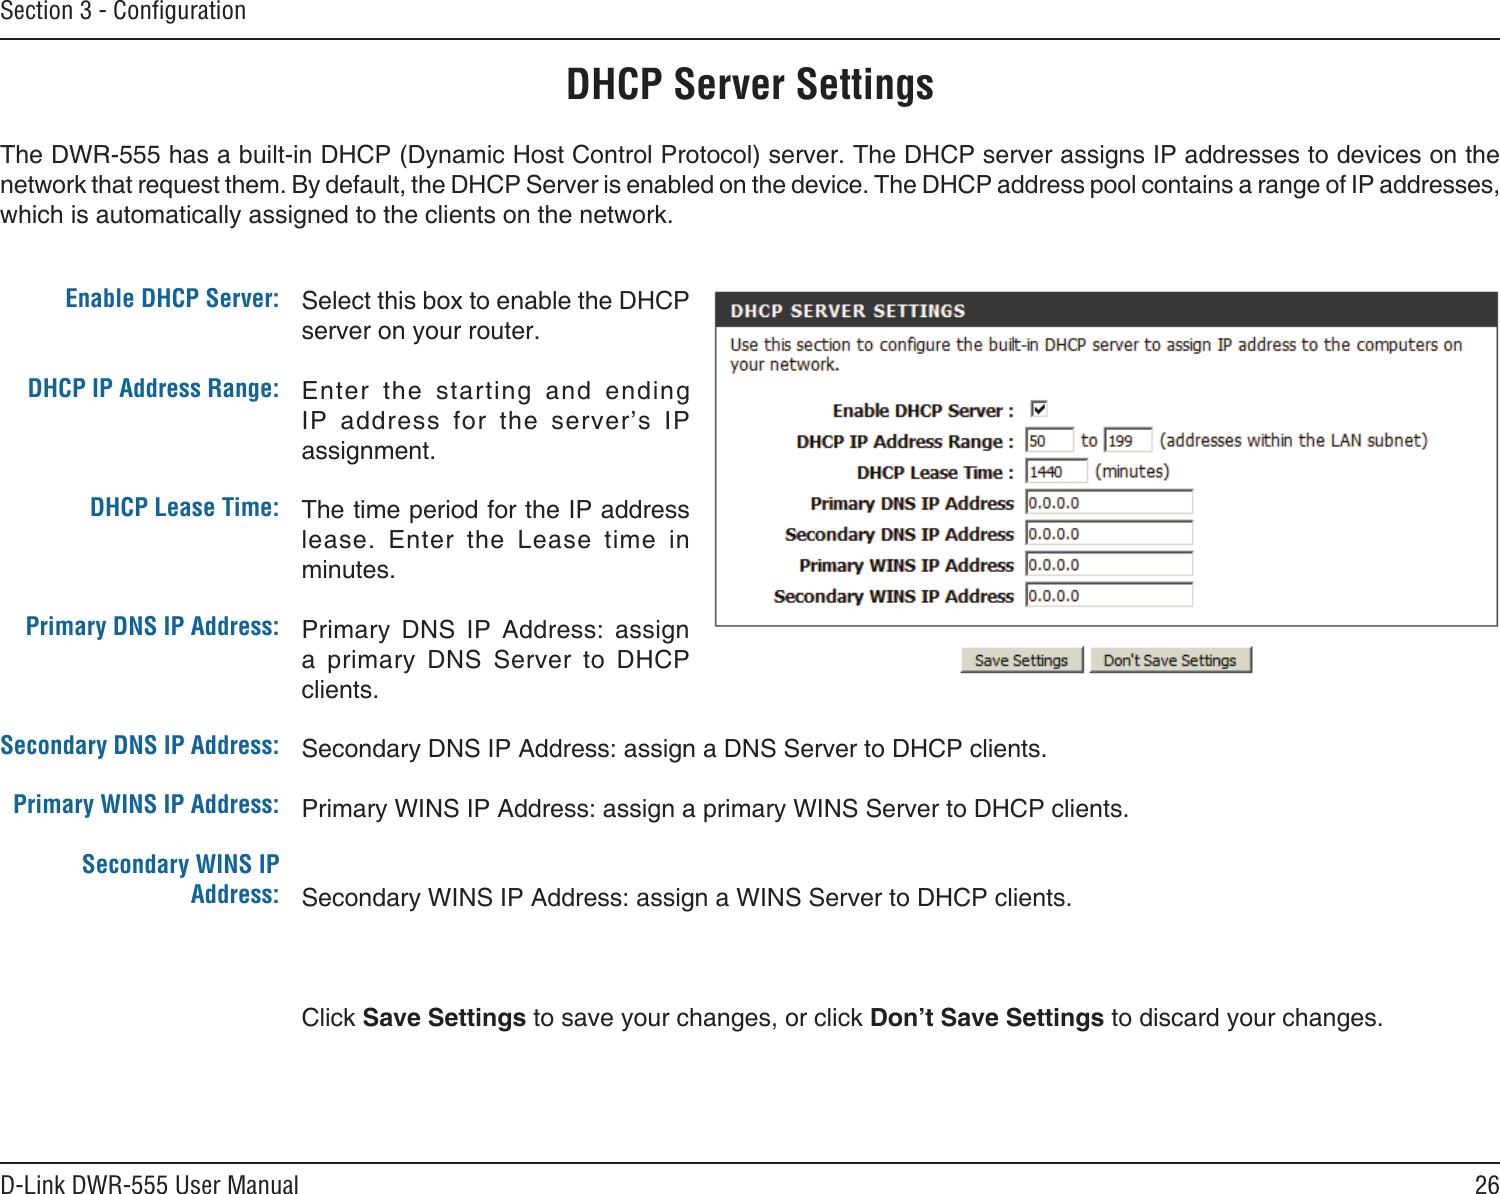 26D-Link DWR-555 User ManualSection 3 - ConﬁgurationSelect this box to enable the DHCP server on your router. Enter  the  starting  and  ending IP  address  for  the  server’s  IP assignment.The time period for the IP address lease.  Enter  the  Lease  time  in minutes.Primary  DNS  IP  Address:  assign a  primary  DNS  Server  to  DHCP clients.Secondary DNS IP Address: assign a DNS Server to DHCP clients.Primary WINS IP Address: assign a primary WINS Server to DHCP clients. Secondary WINS IP Address: assign a WINS Server to DHCP clients.Click Save Settings to save your changes, or click Don’t Save Settings to discard your changes.Enable DHCP Server: DHCP IP Address Range:DHCP Lease Time:Primary DNS IP Address:Secondary DNS IP Address:Primary WINS IP Address:Secondary WINS IP Address:DHCP Server SettingsThe DWR-555 has a built-in DHCP (Dynamic Host Control Protocol) server. The DHCP server assigns IP addresses to devices on the network that request them. By default, the DHCP Server is enabled on the device. The DHCP address pool contains a range of IP addresses, which is automatically assigned to the clients on the network.